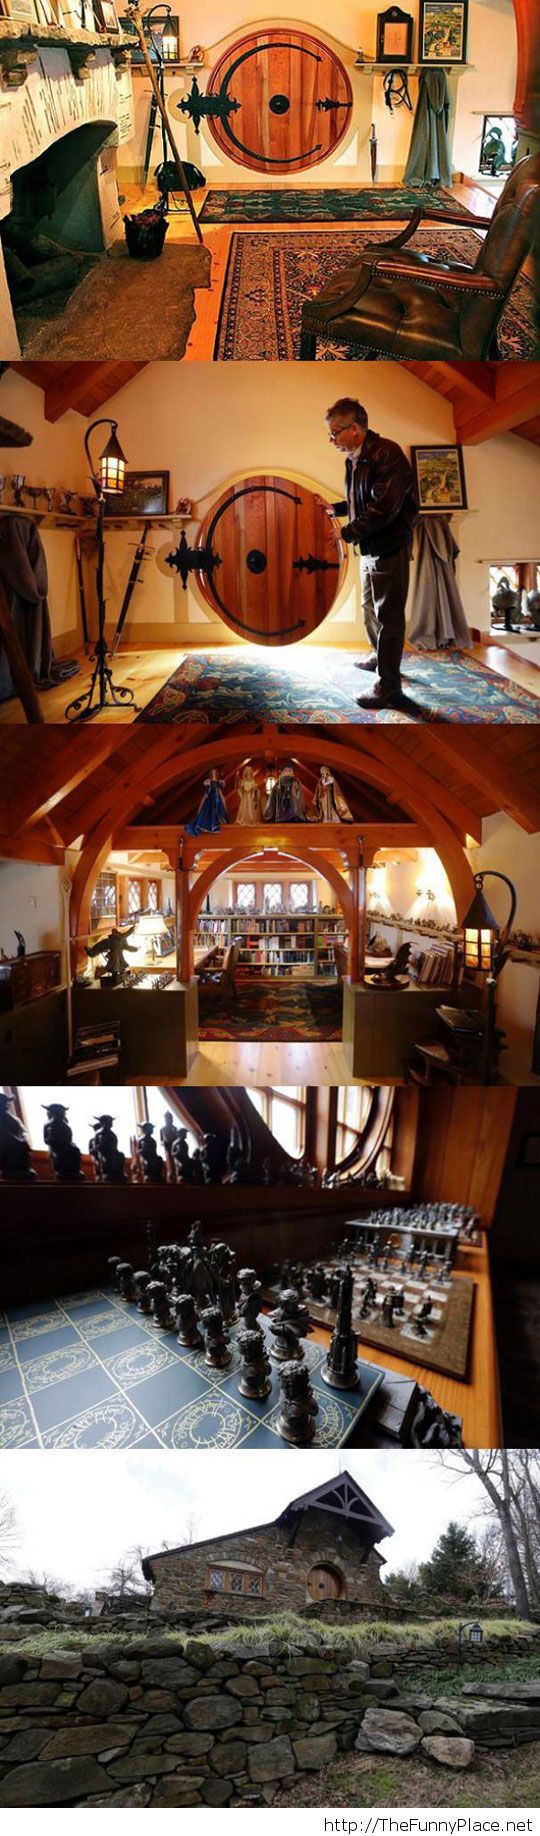 Real life Hobbit house